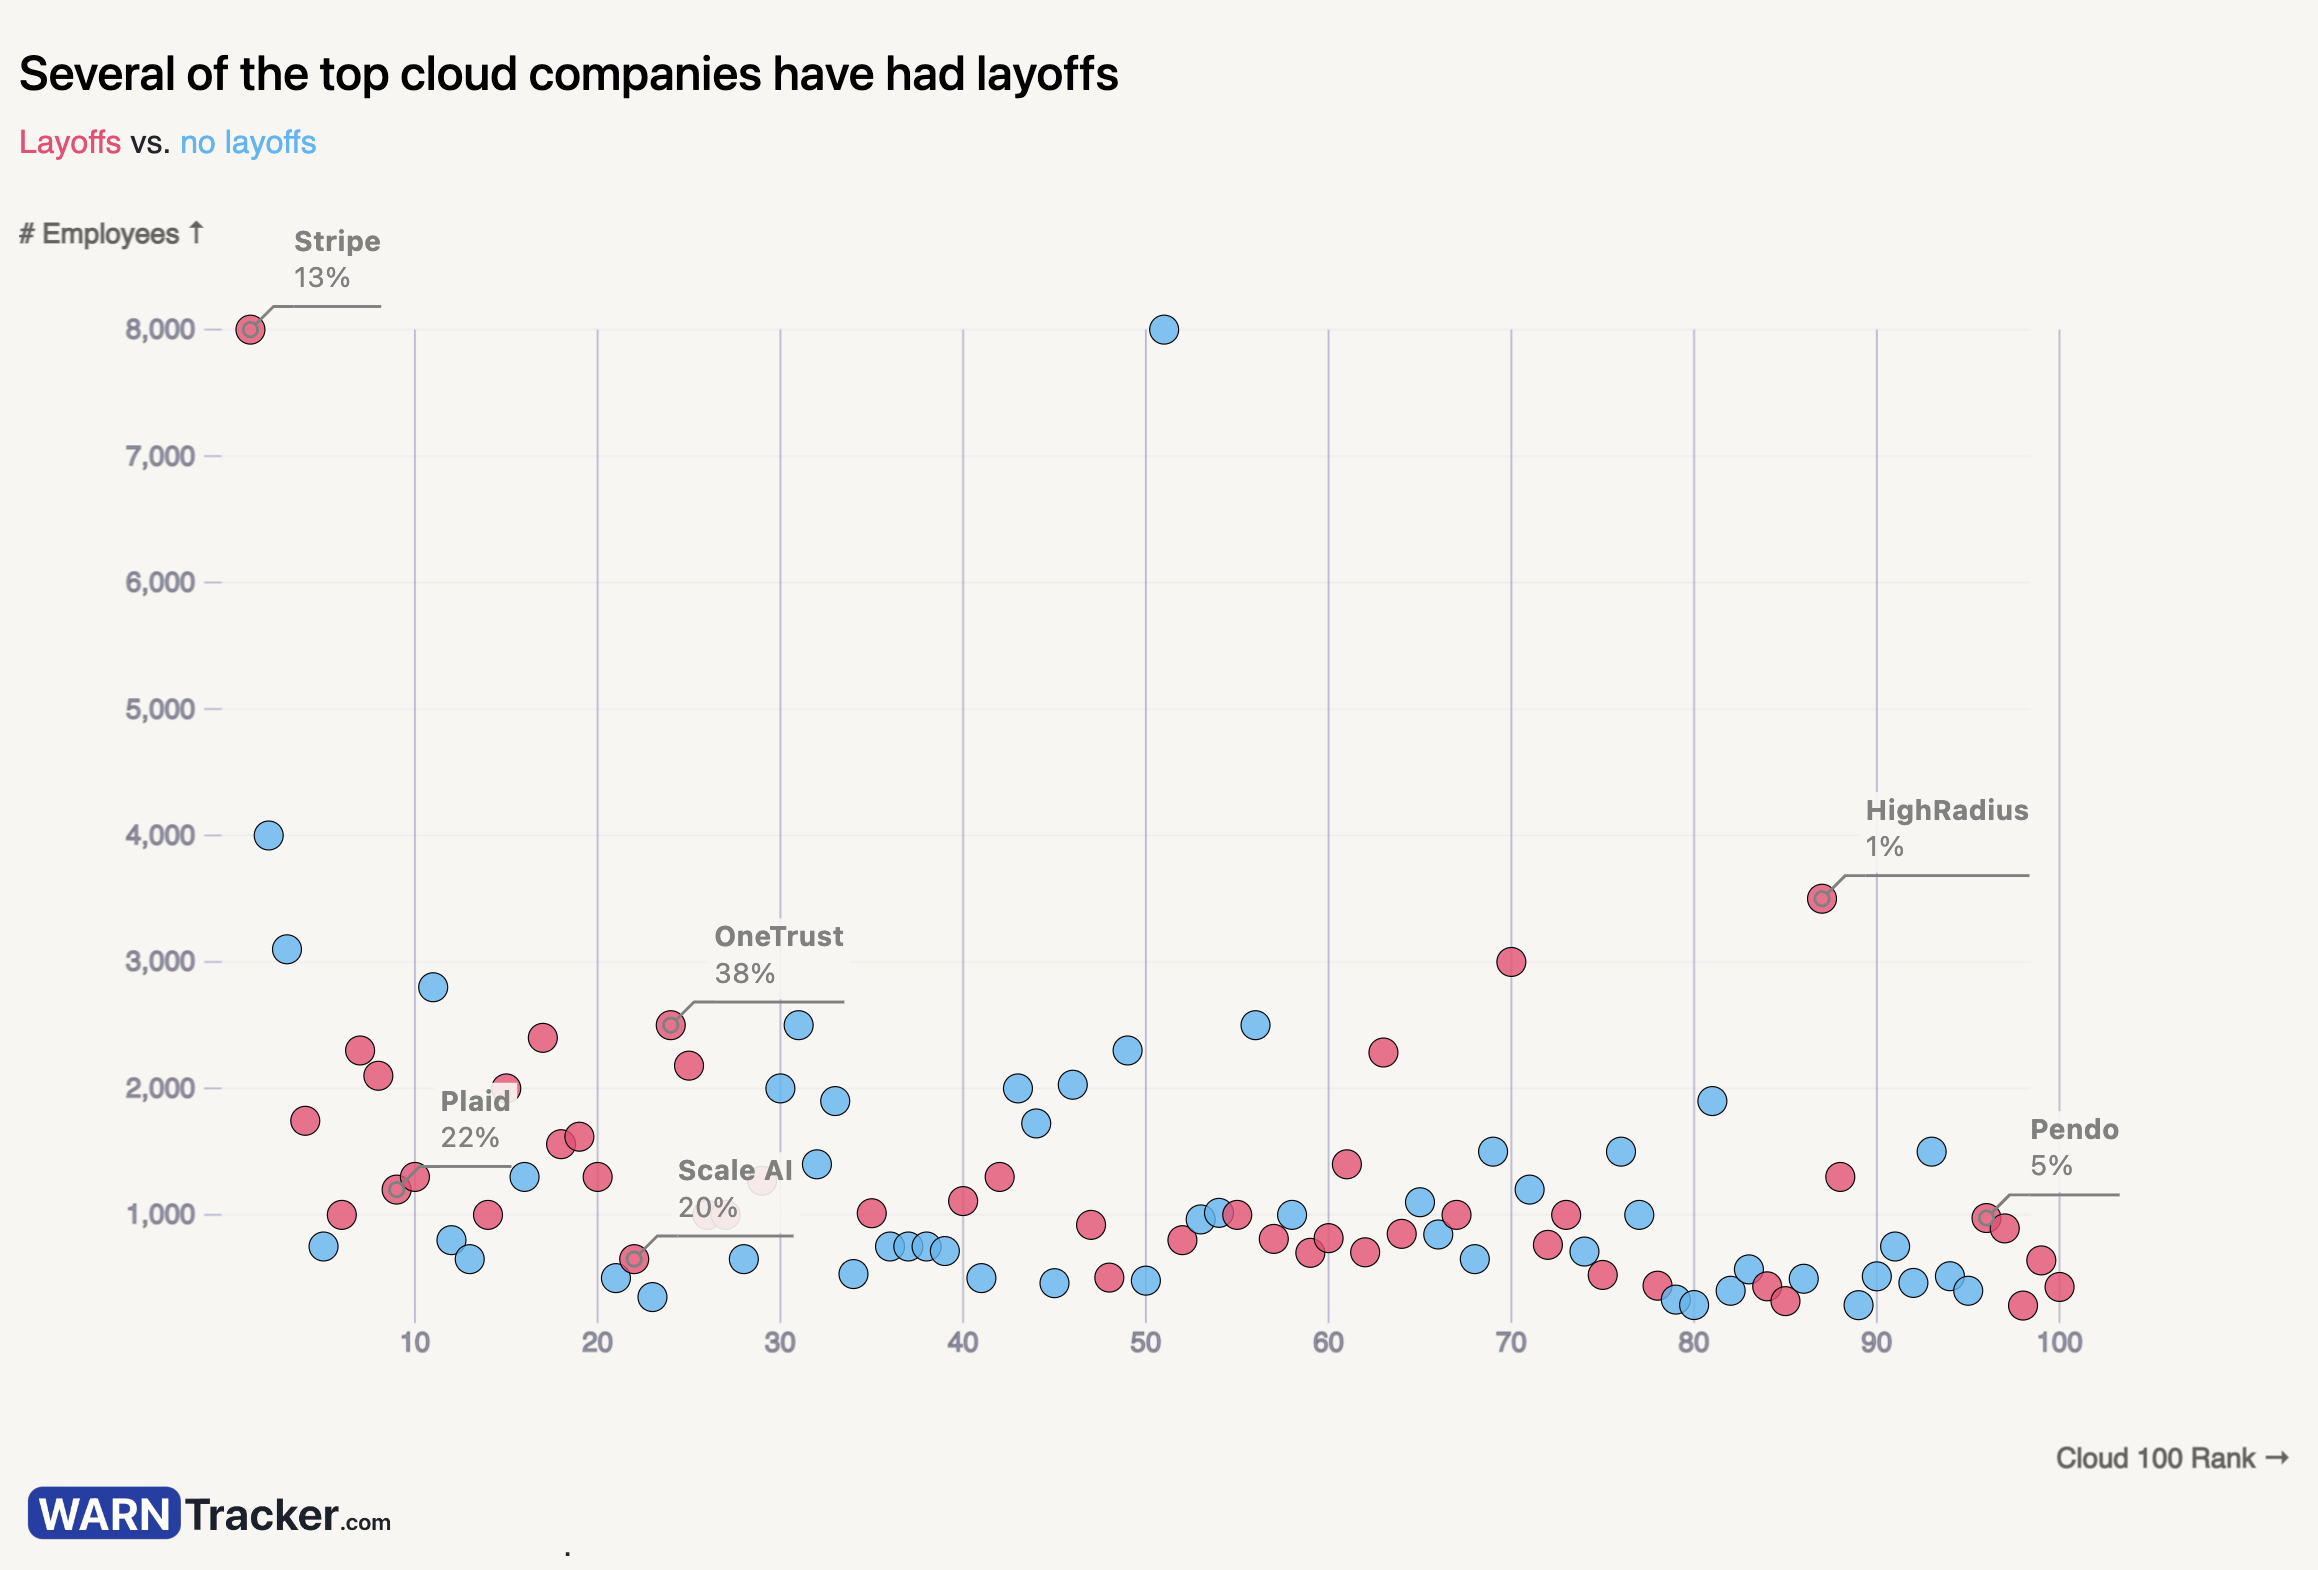 Preview image of a chart showing layoffs by the cloud 100